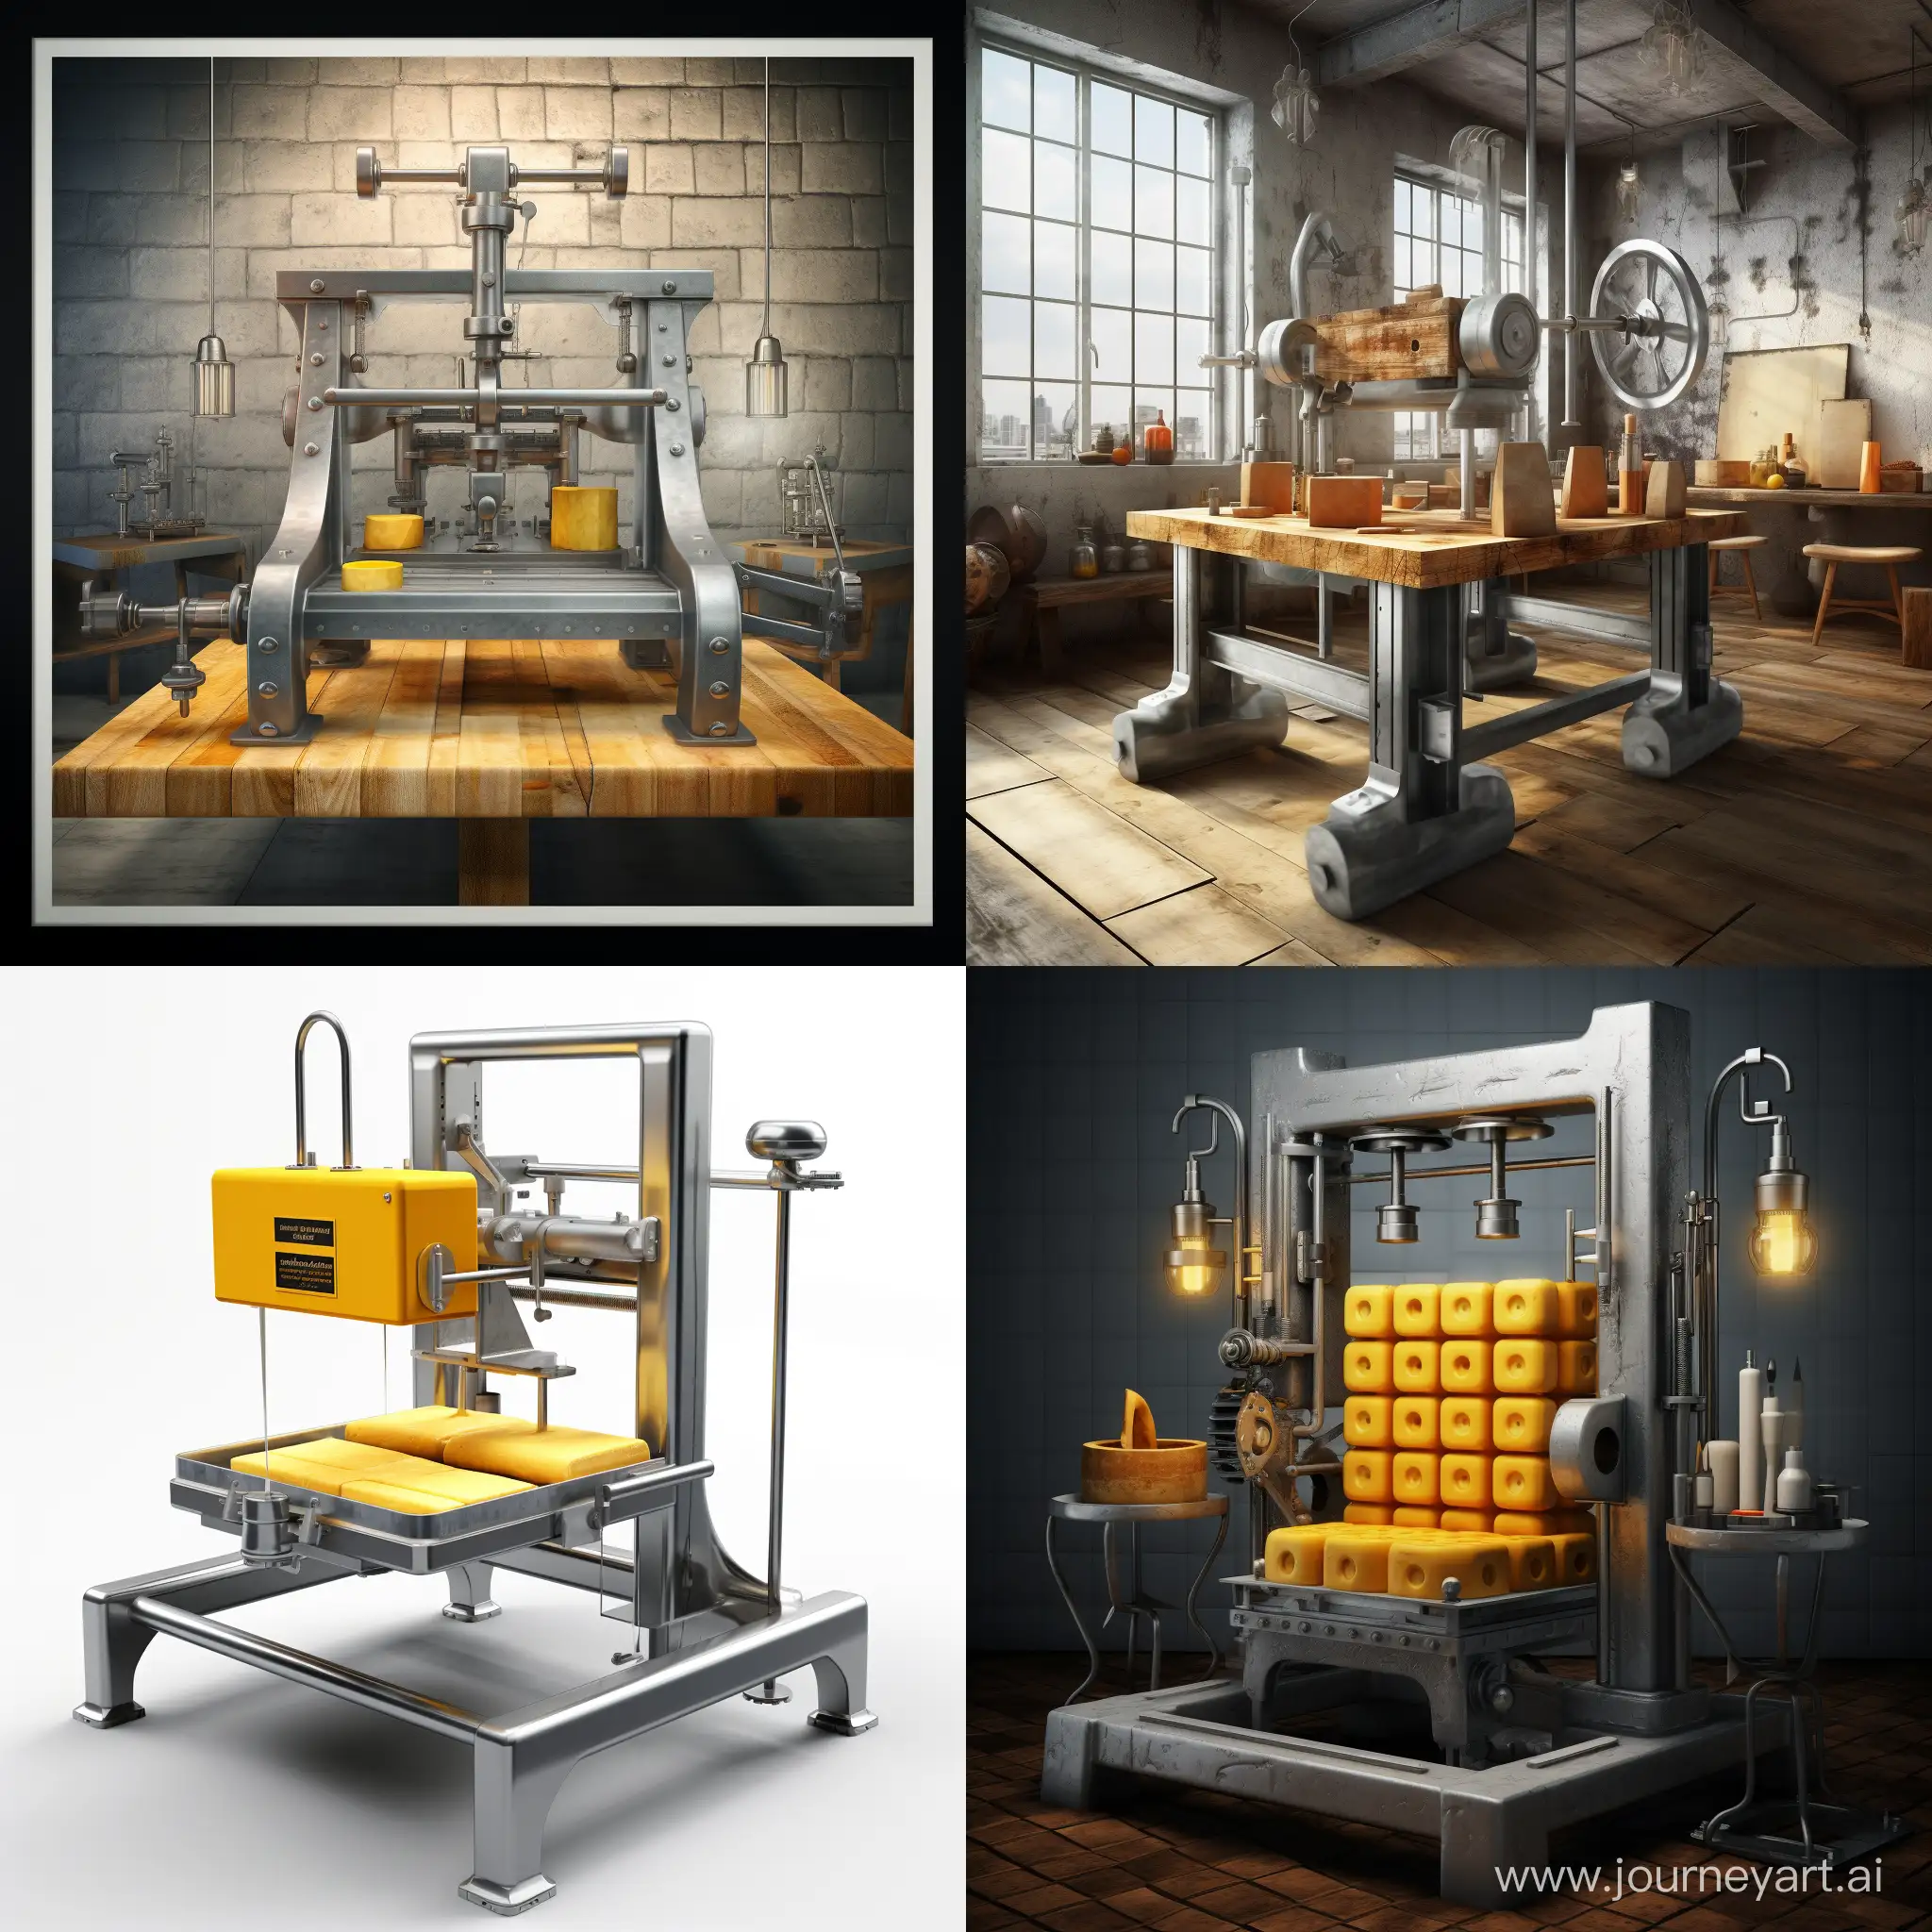 Photo-realistic 8k manual mechanical stainless steel press for pressing cheese heads trolley on wheels
Two removable pylons above a rectangular bathtub with three screw drives of presses. real industrial style